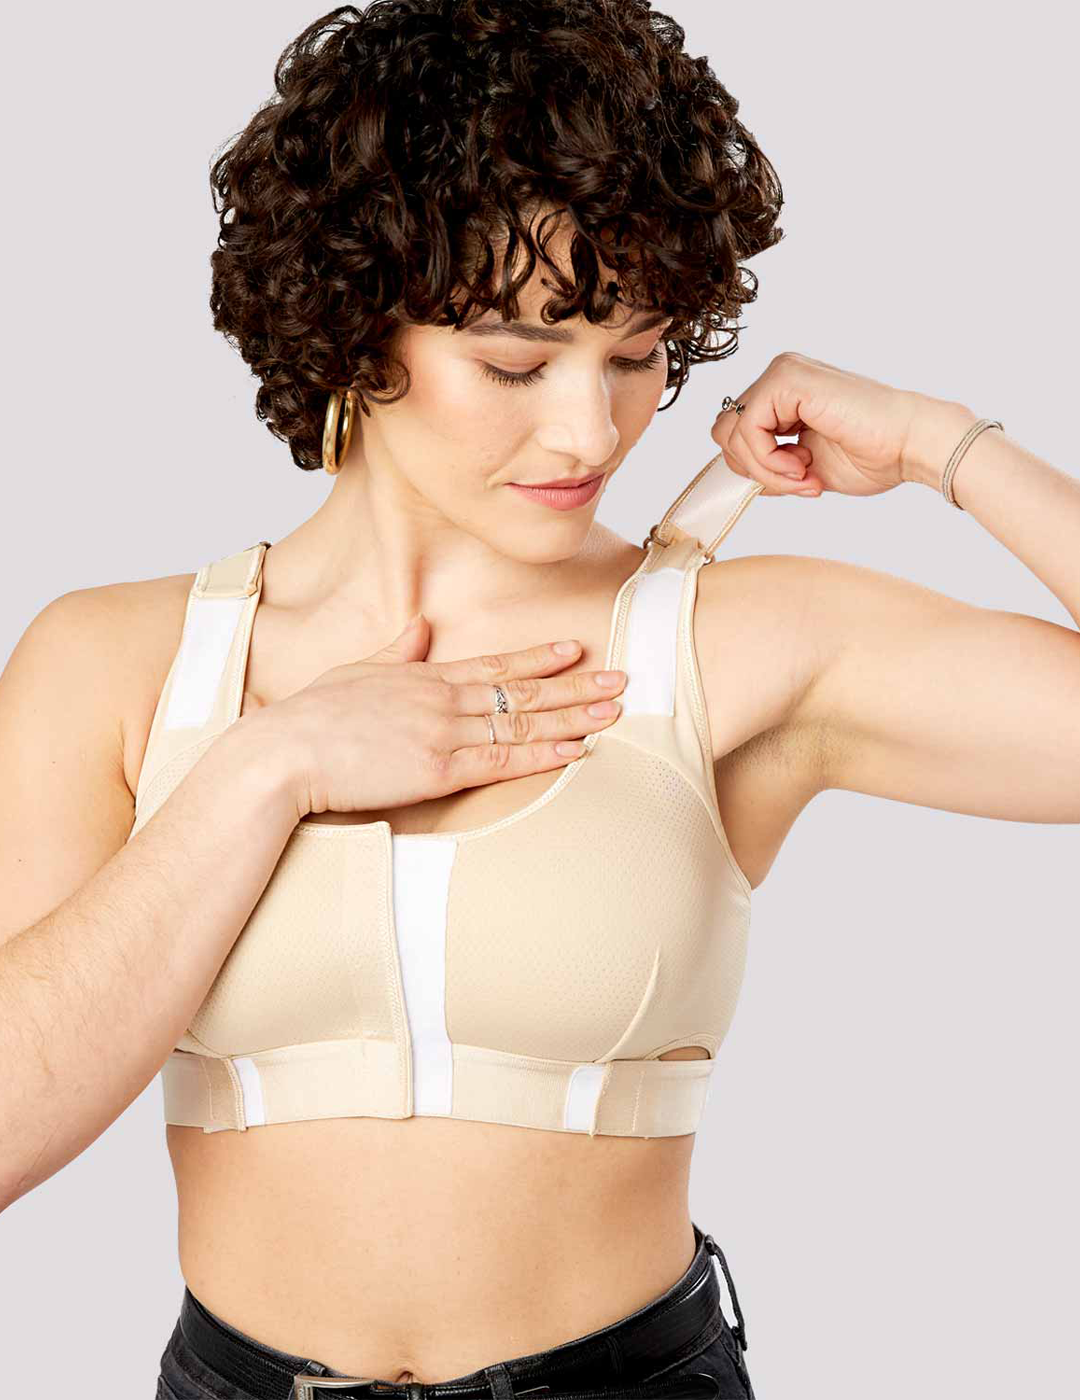 Post Mastectomy Bra Guide: Things to know about buying your first bras -  Front Room Underfashions